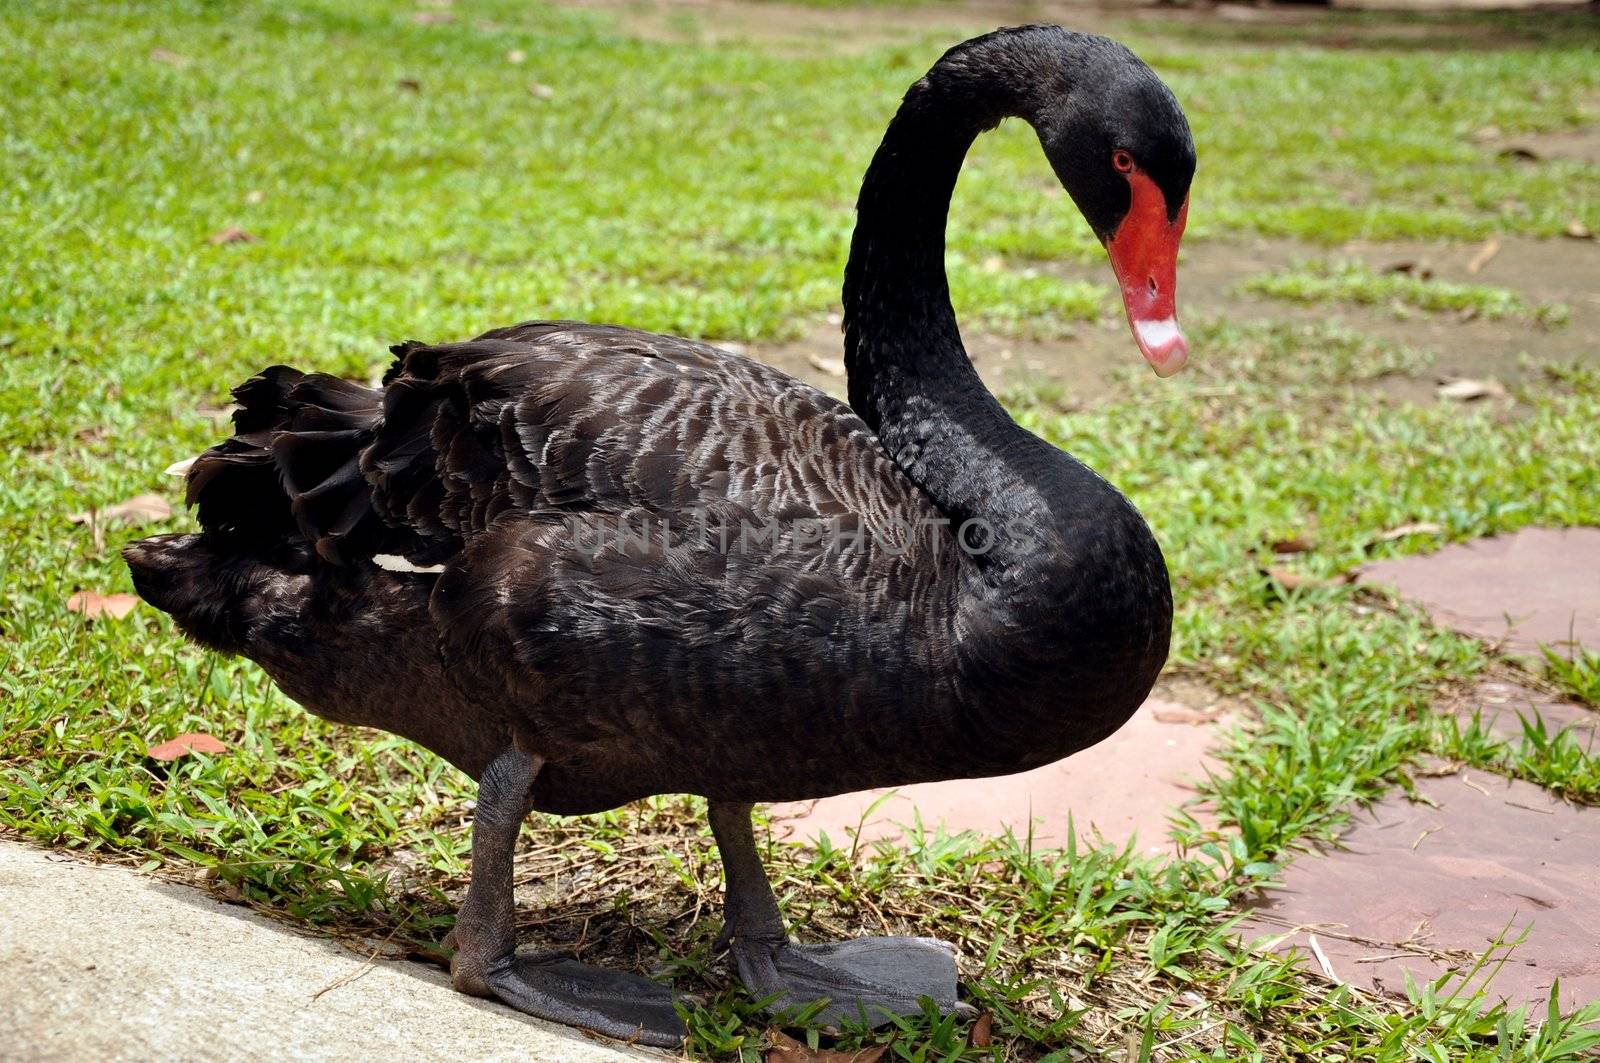 Black Swans are primarily black-feathered birds, with white flight feathers.